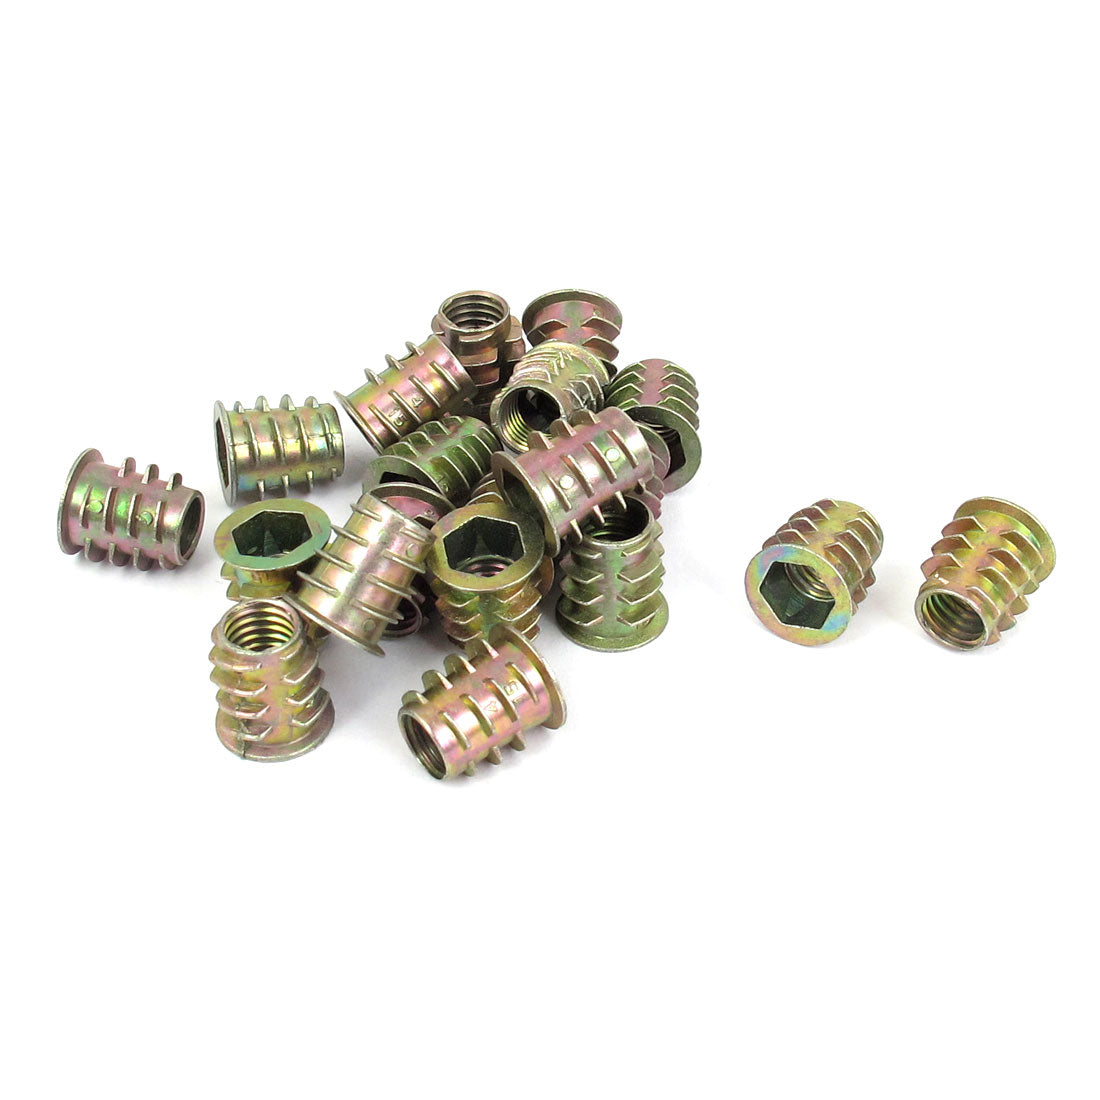 uxcell Uxcell 20 Pcs M8x15mm Zinc Plated Hex Socket Screw in Thread Insert Nut for Wood